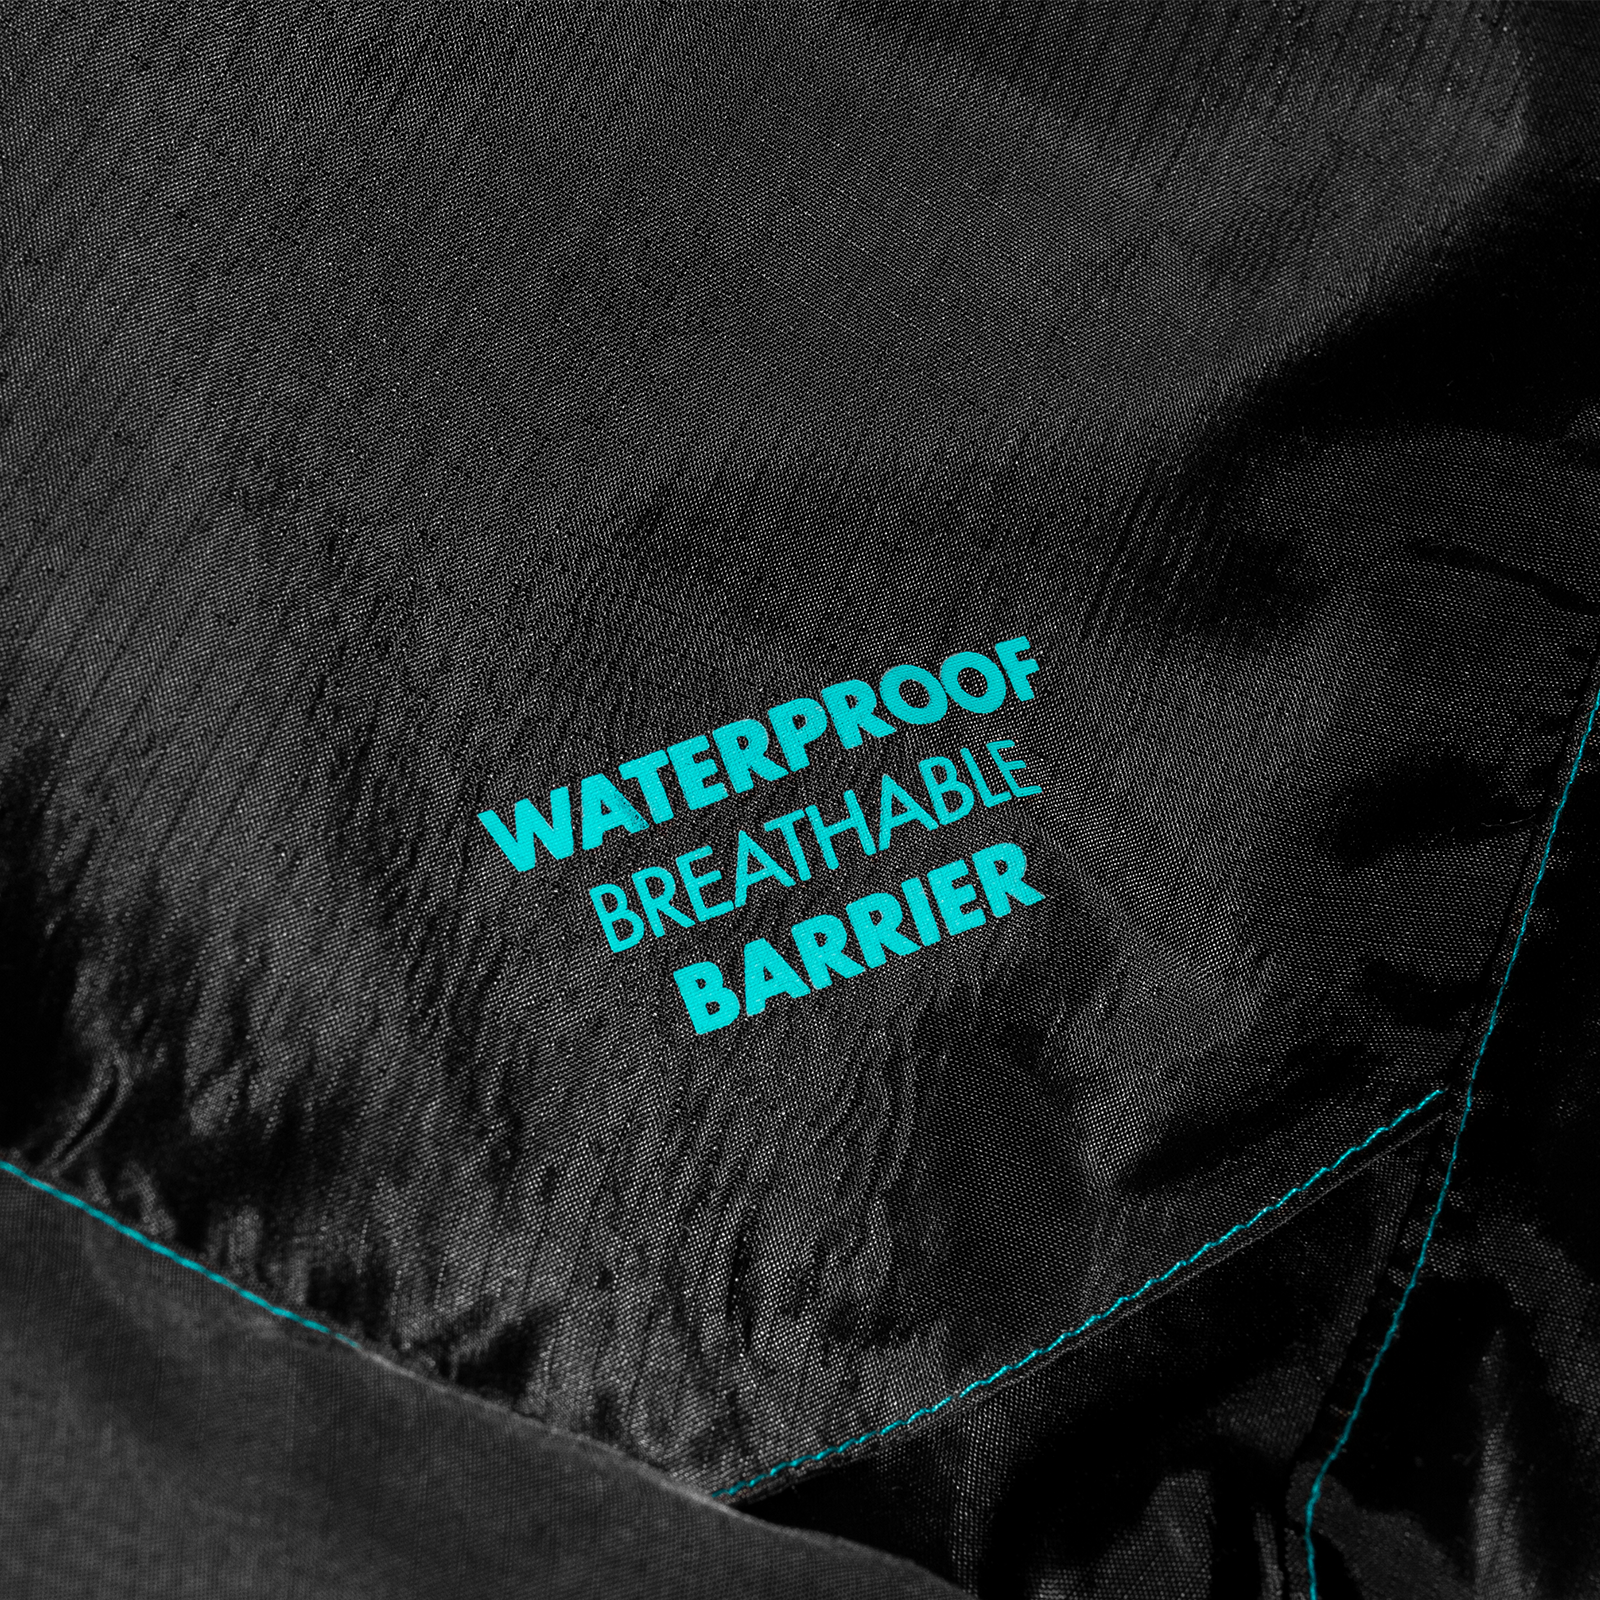 Watershield | Bed Cover